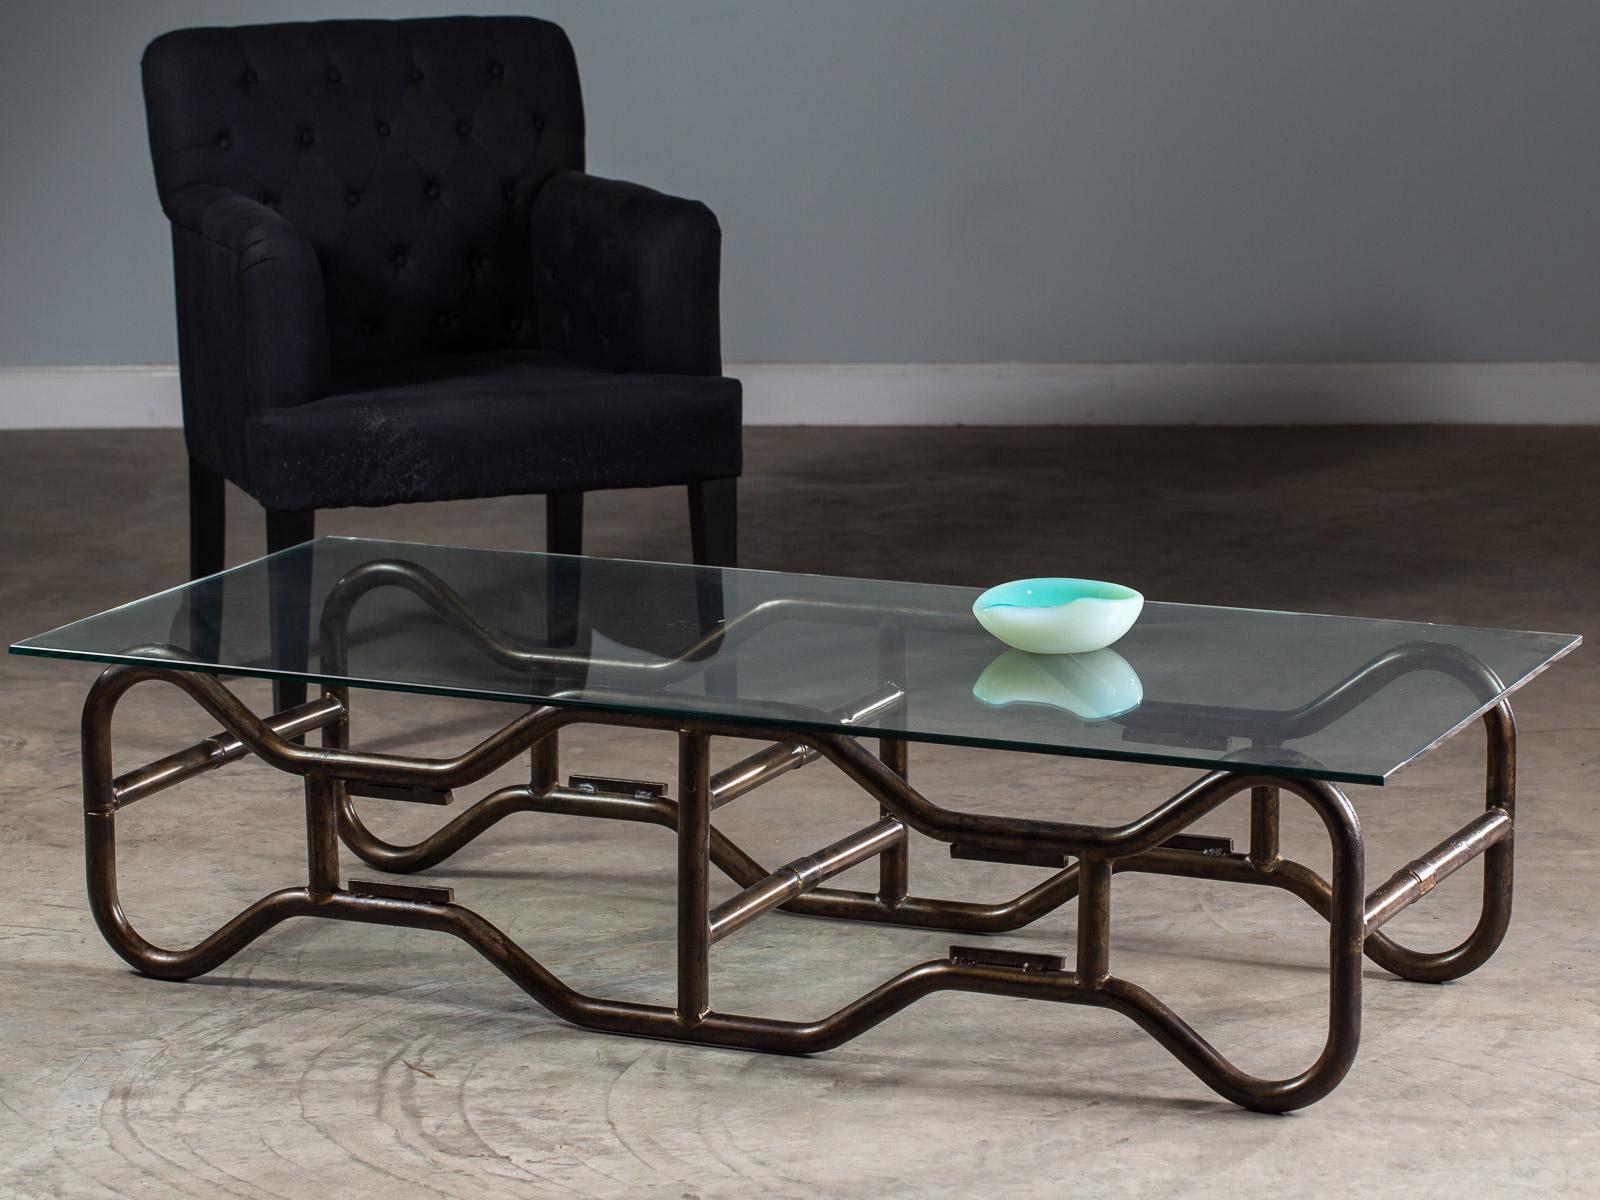 A modern French industrial tubular steel frame coffee table from France circa 1970 with a glass top. The striking profile of this table base showcases its modernist origin both in the material employed as well as the open framework design. By using